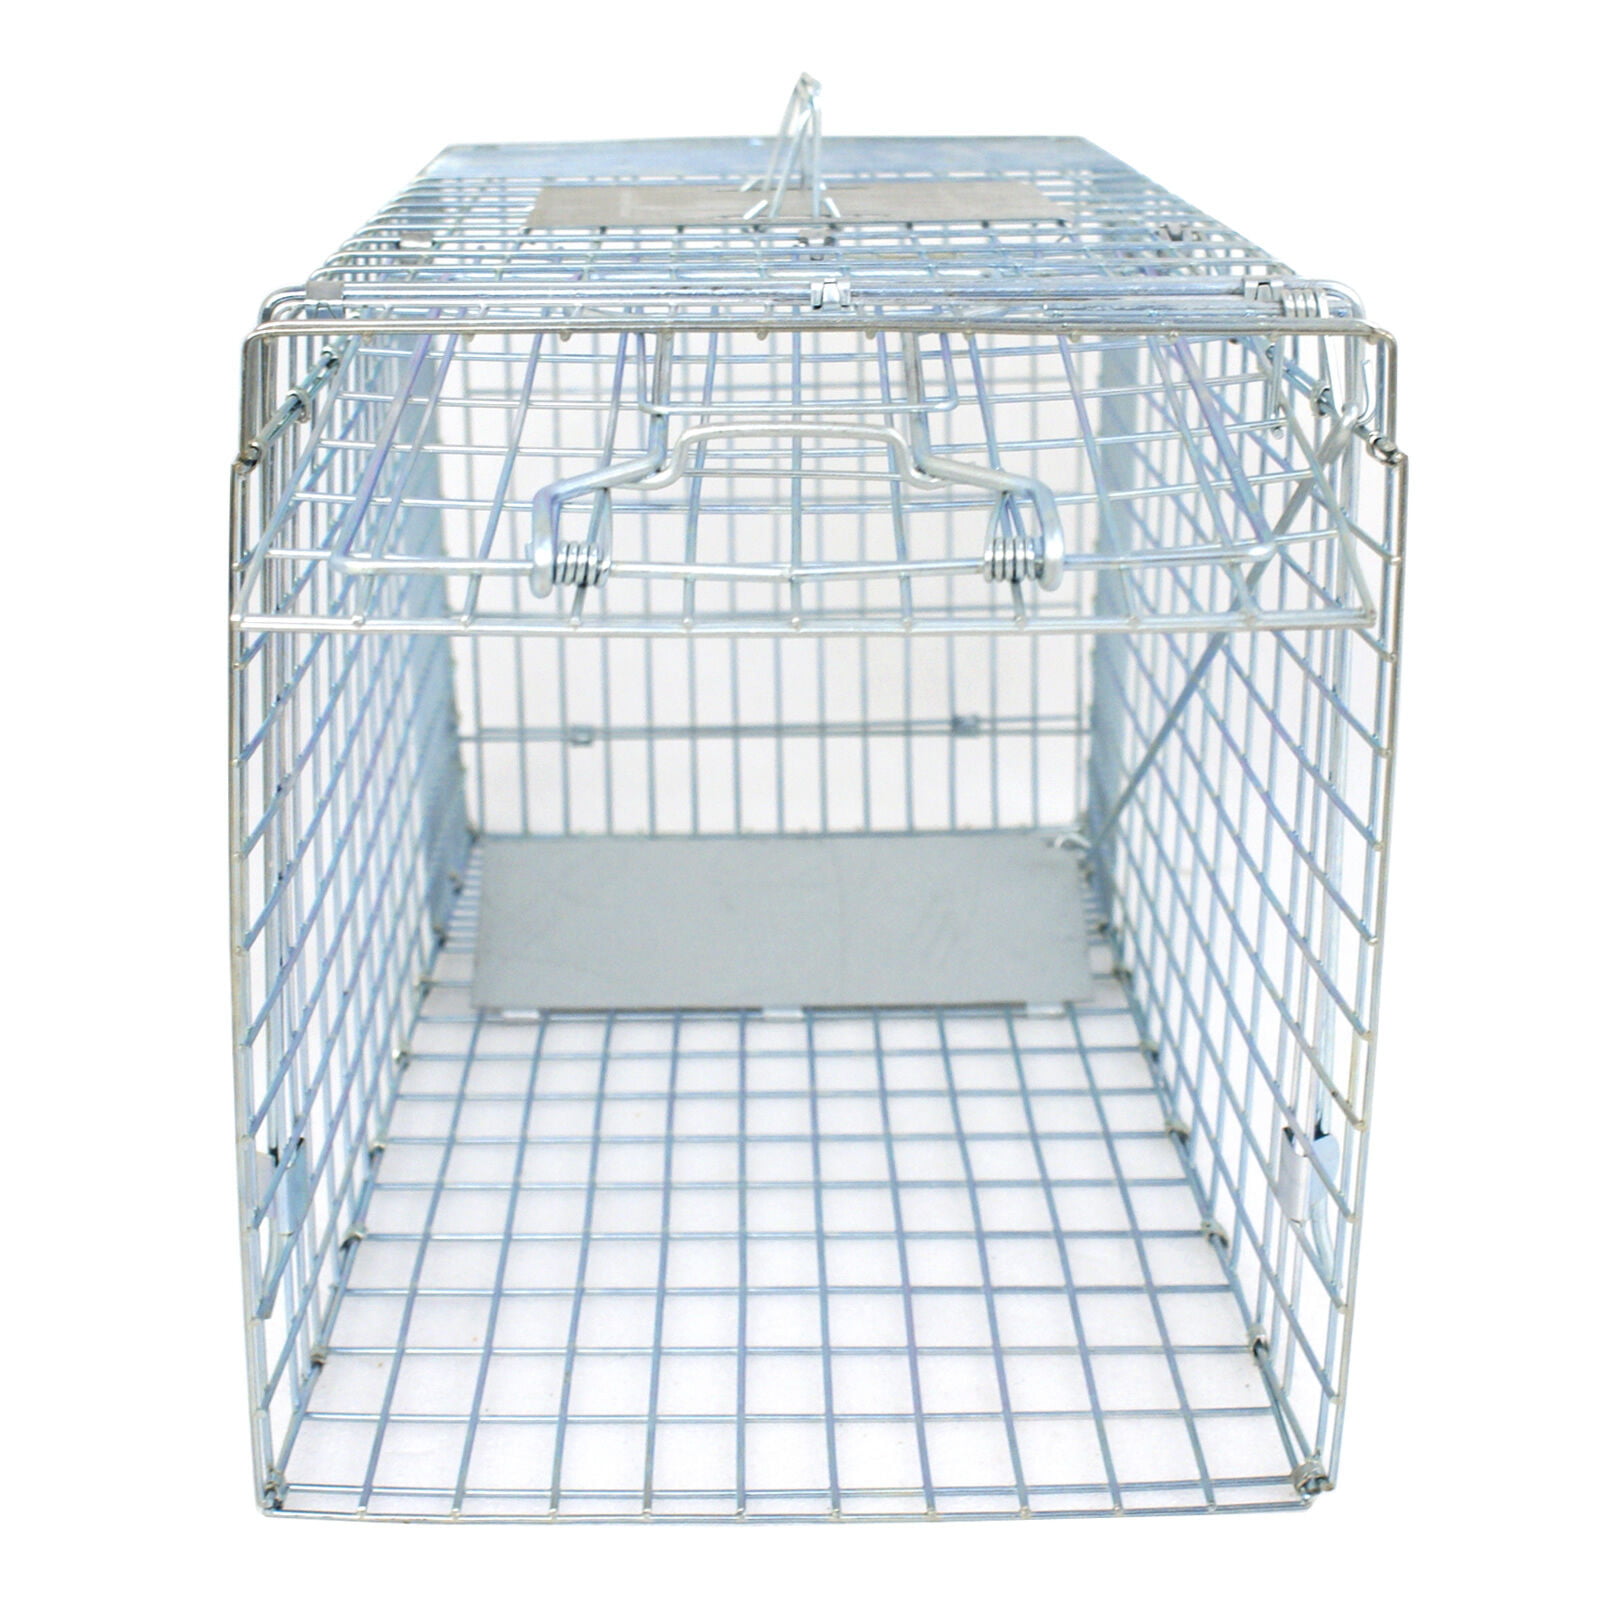 Humane Small Live Animal Control Steel Trap Cage 32"x12.5"x12" Raccoon Skunk Cat 